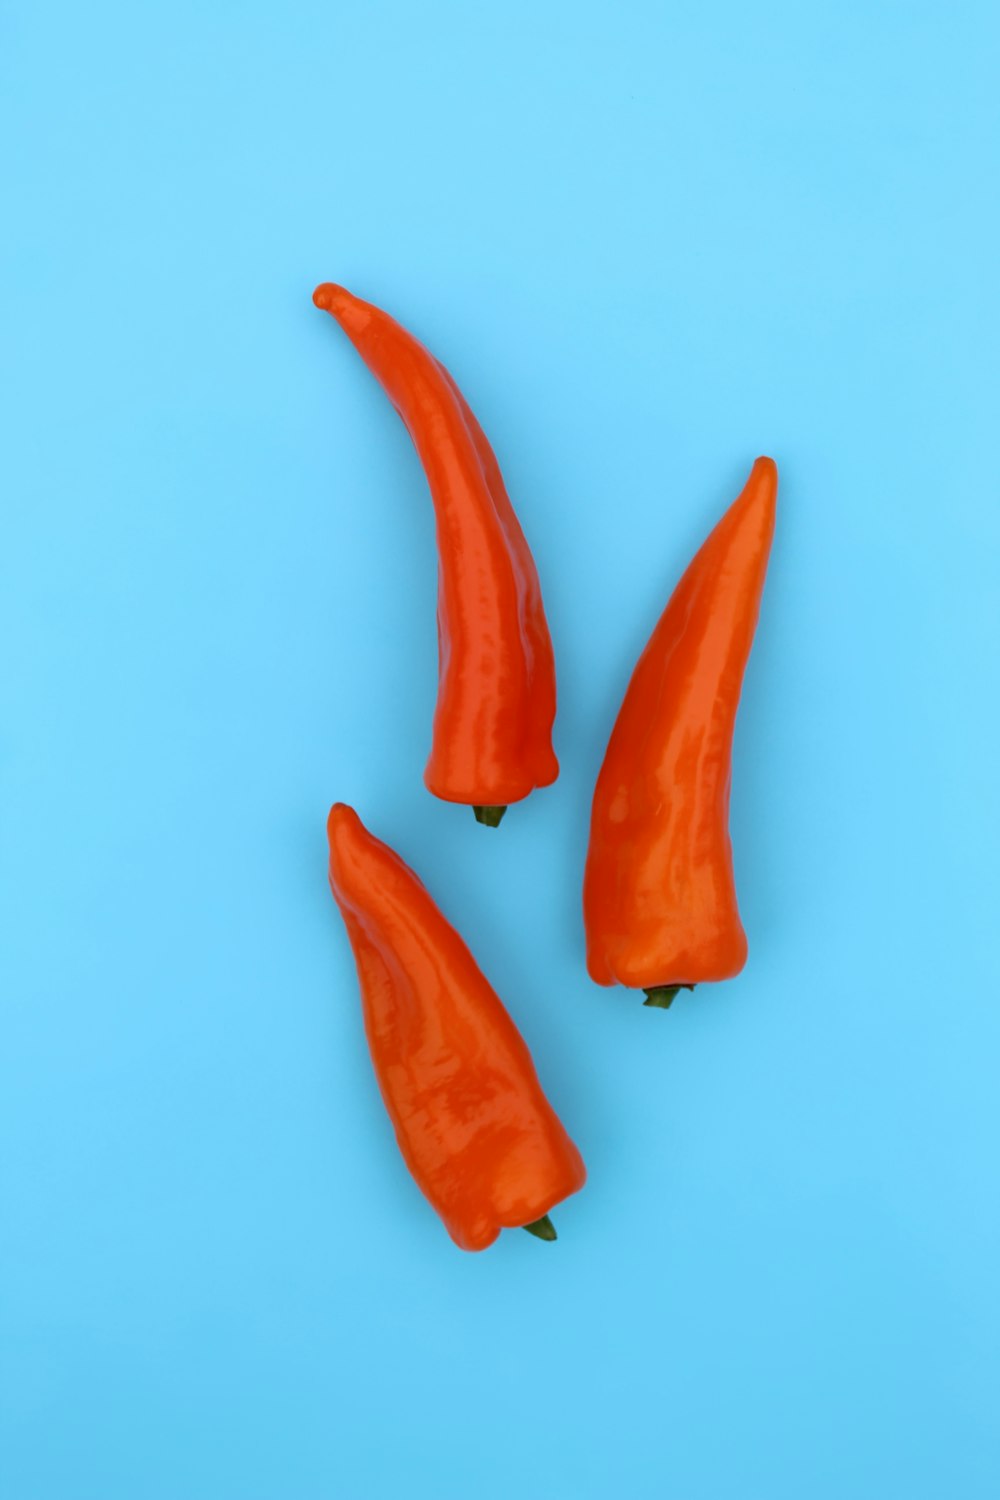 red chili pepper on white surface